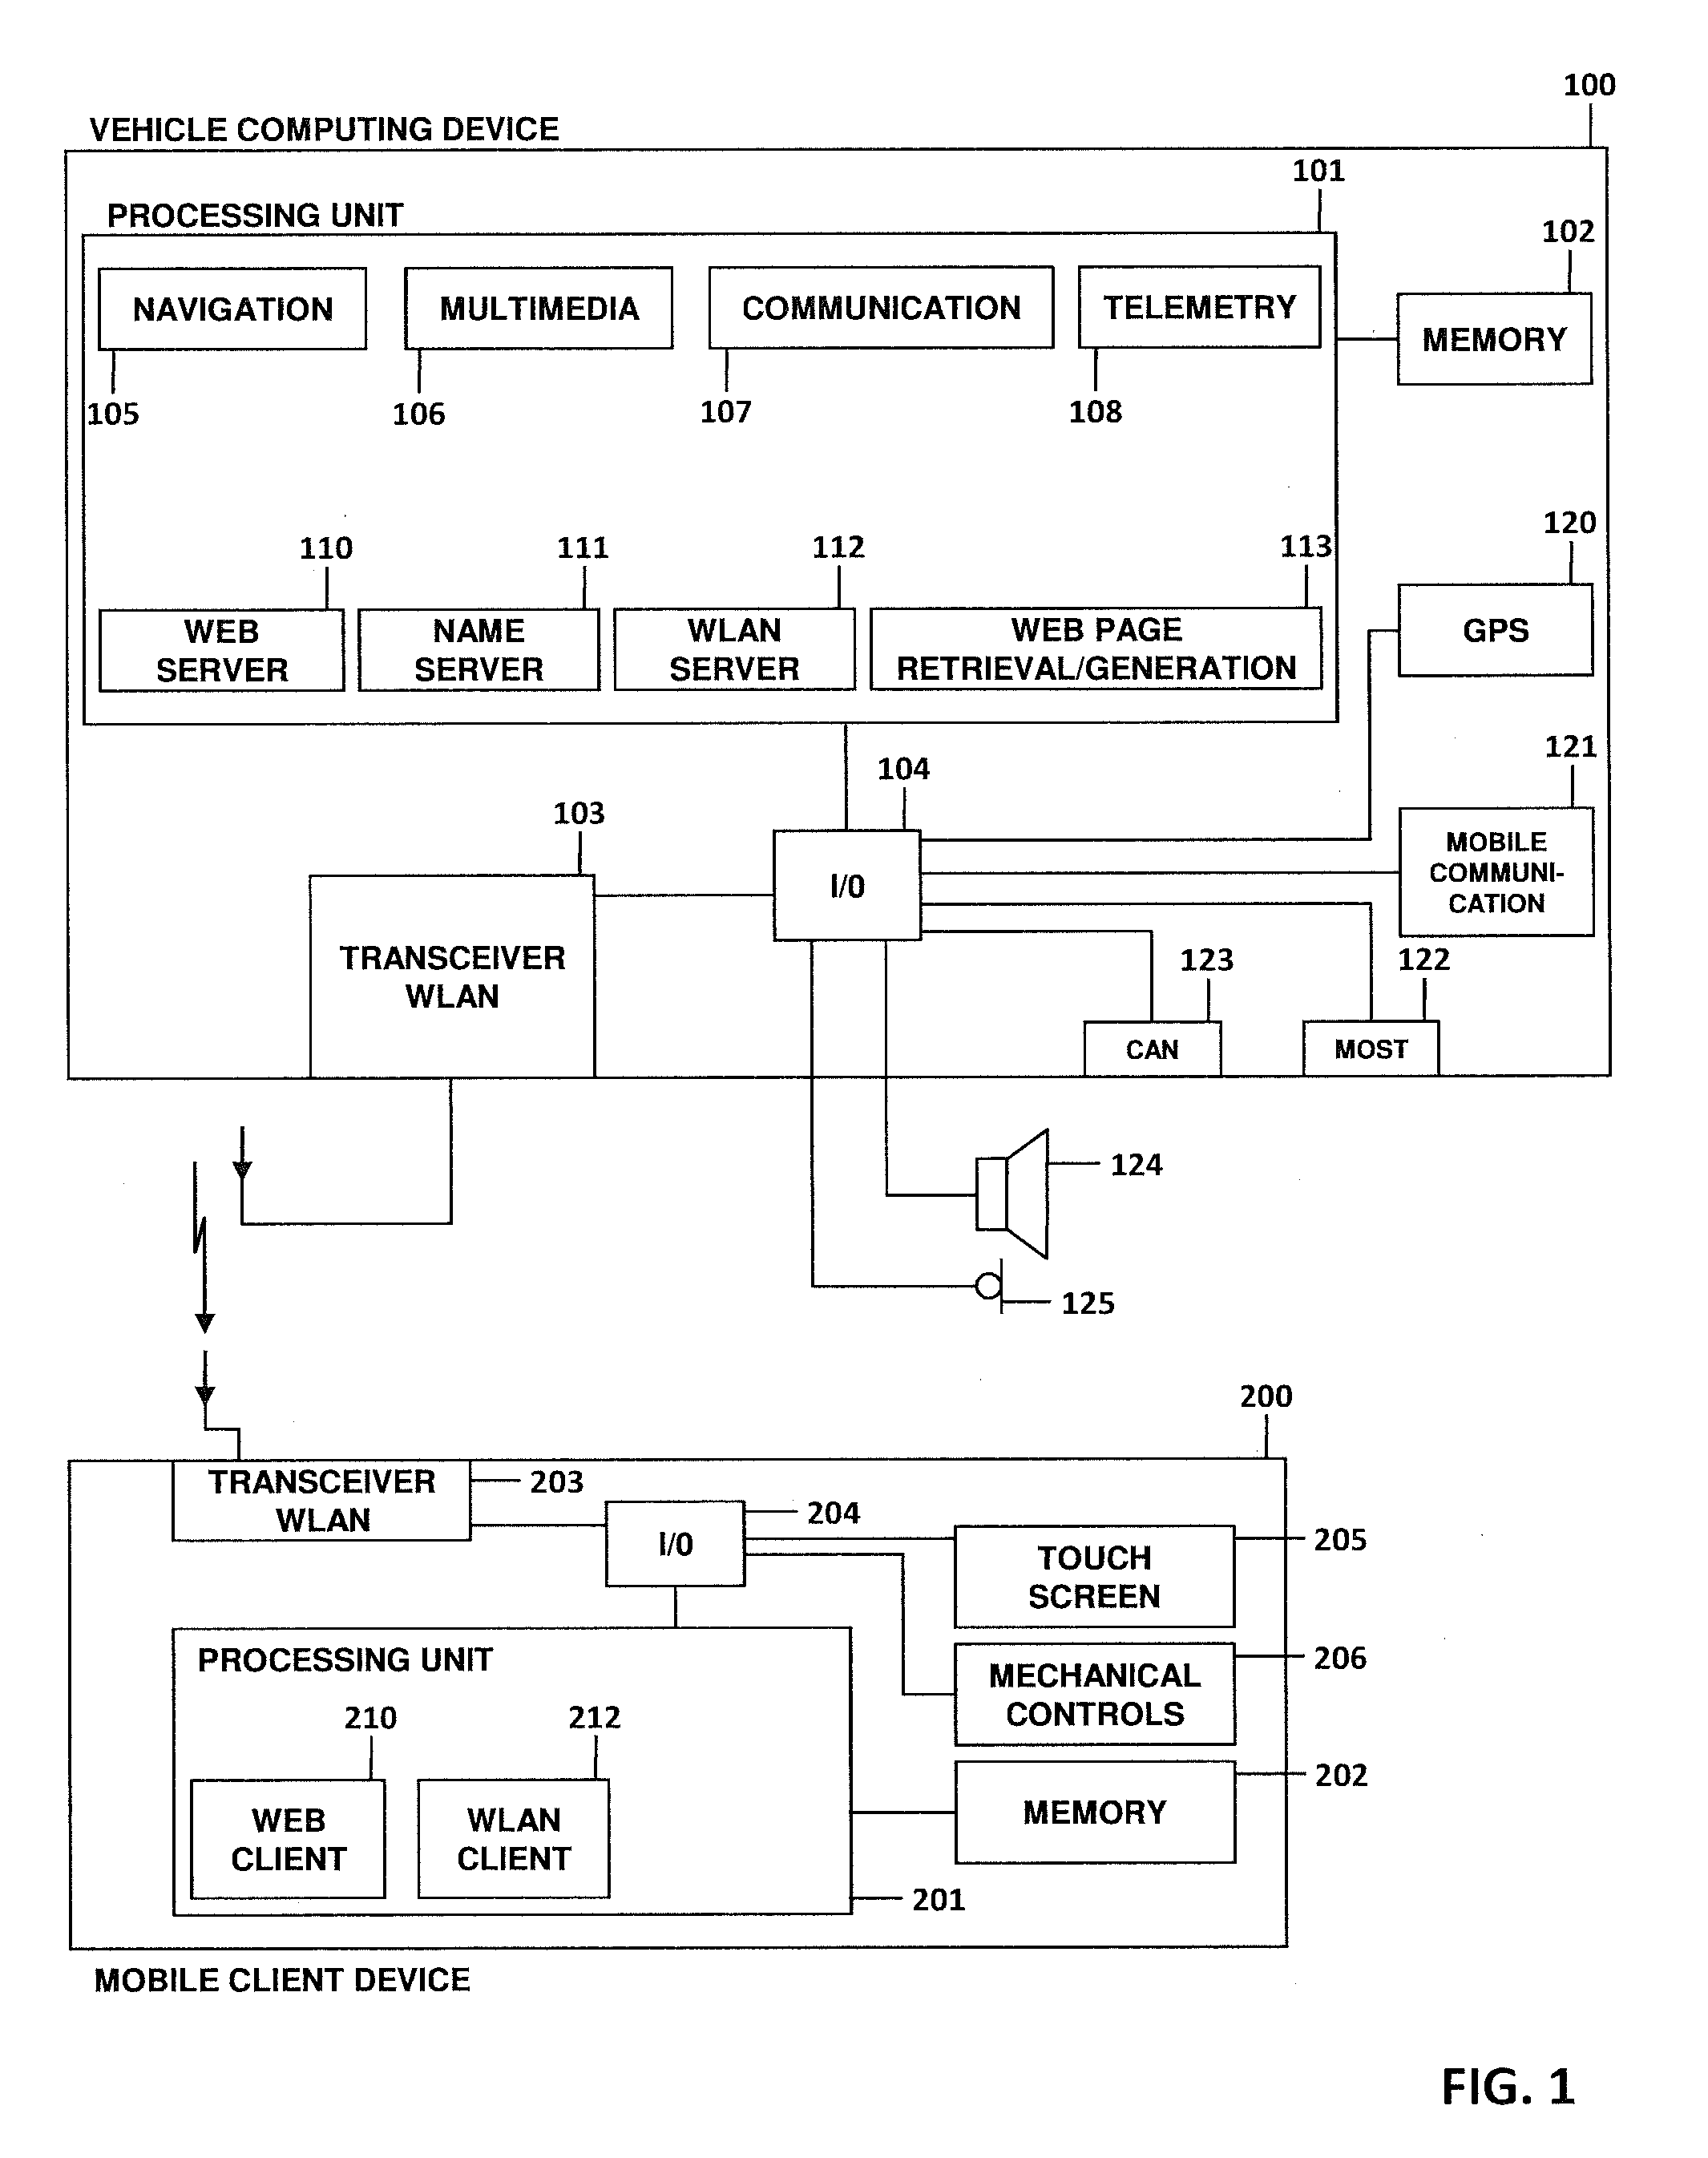 User interface for a vehicle system